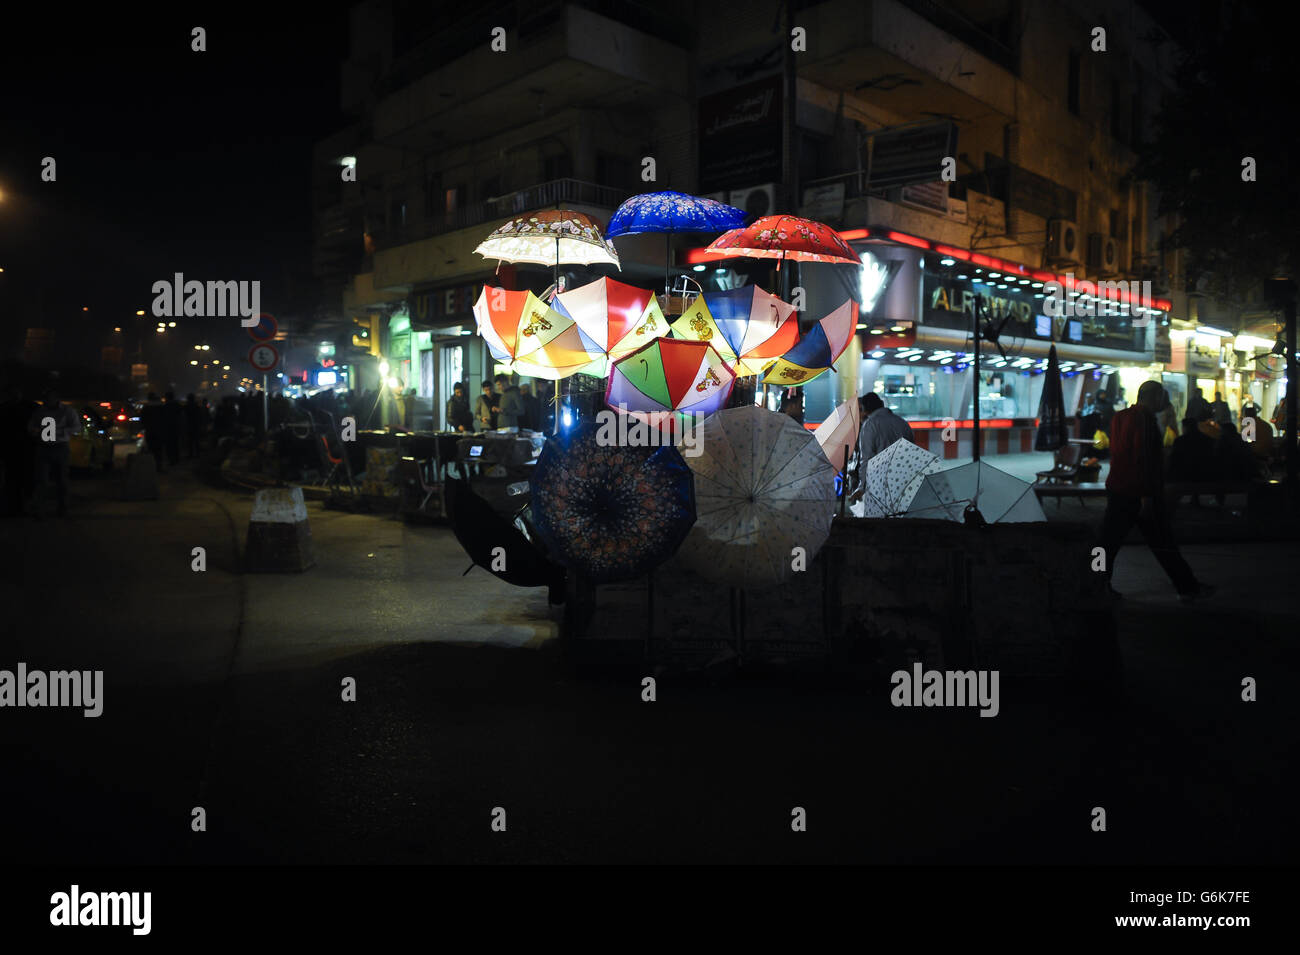 An umbrella vendor's stall is lit up at night on the streets of Baghdad, Iraq. Stock Photo